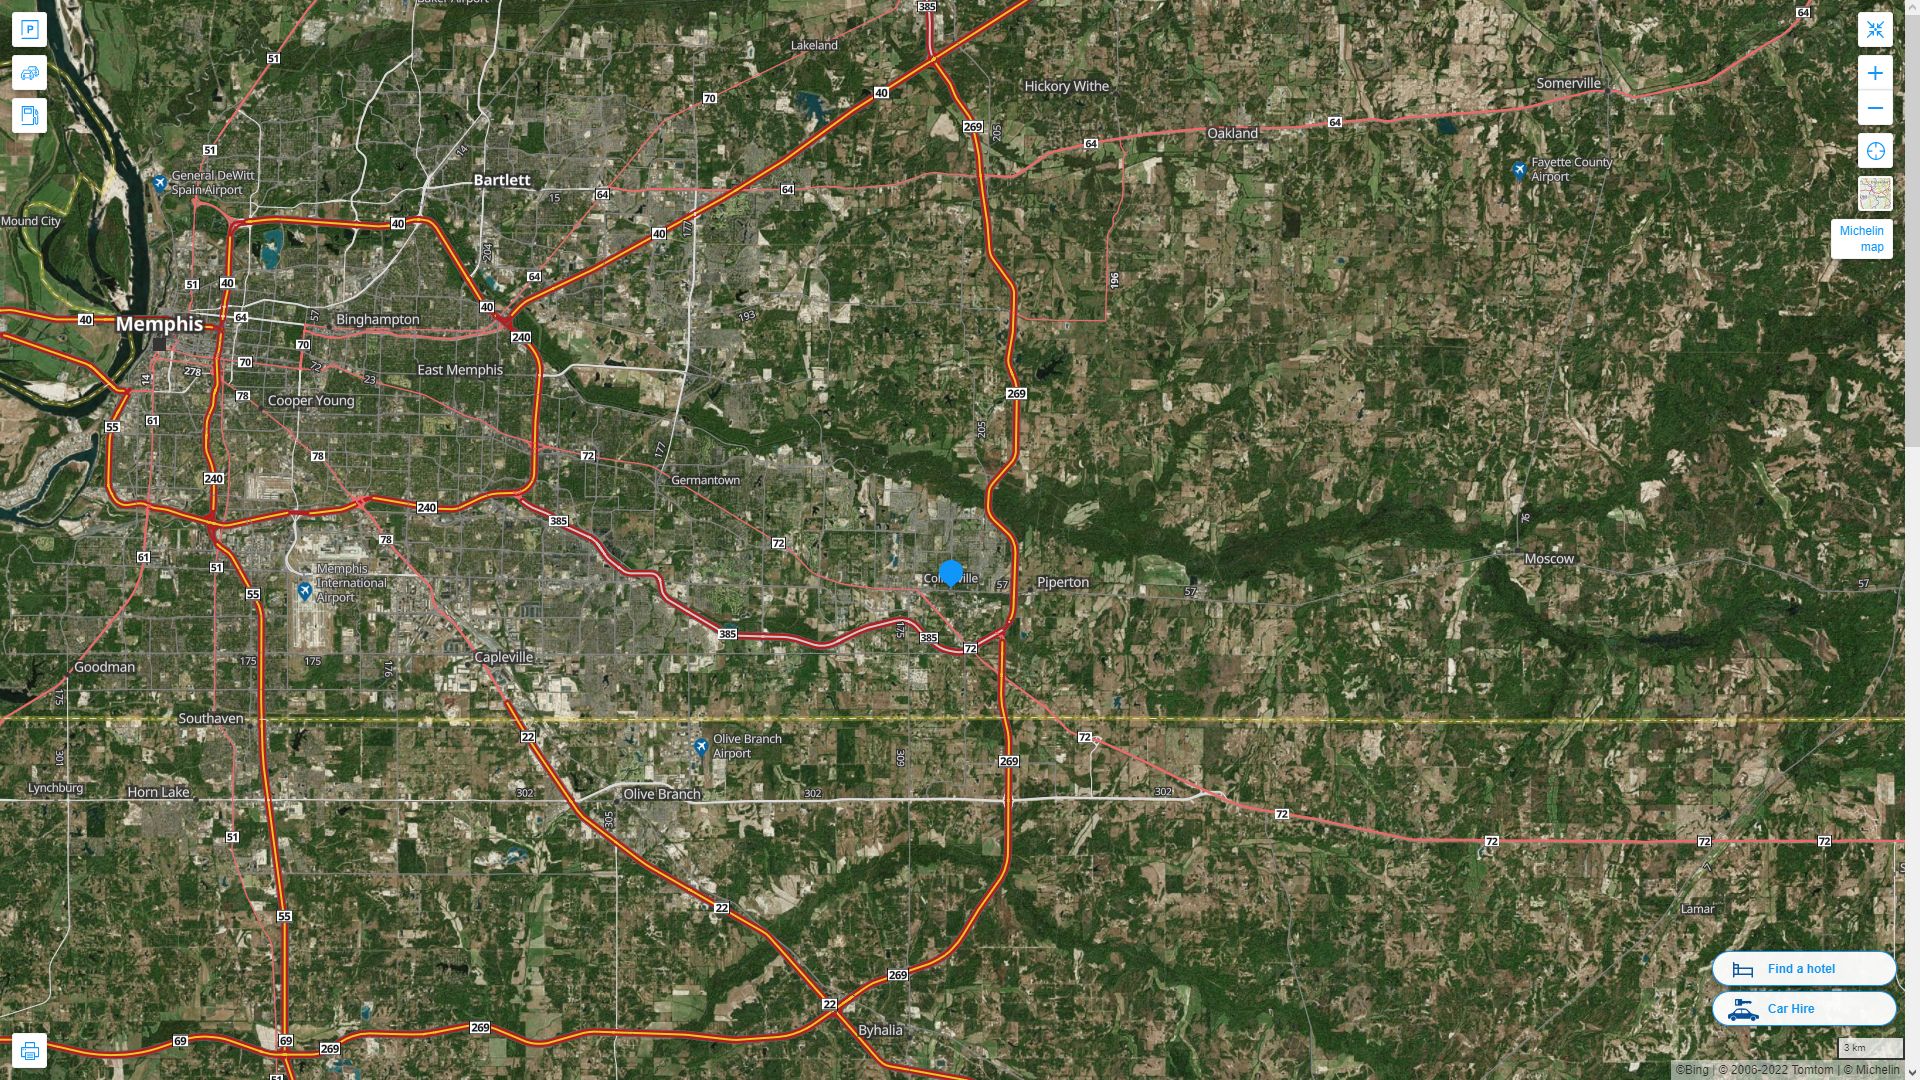 Collierville Tennessee Highway and Road Map with Satellite View